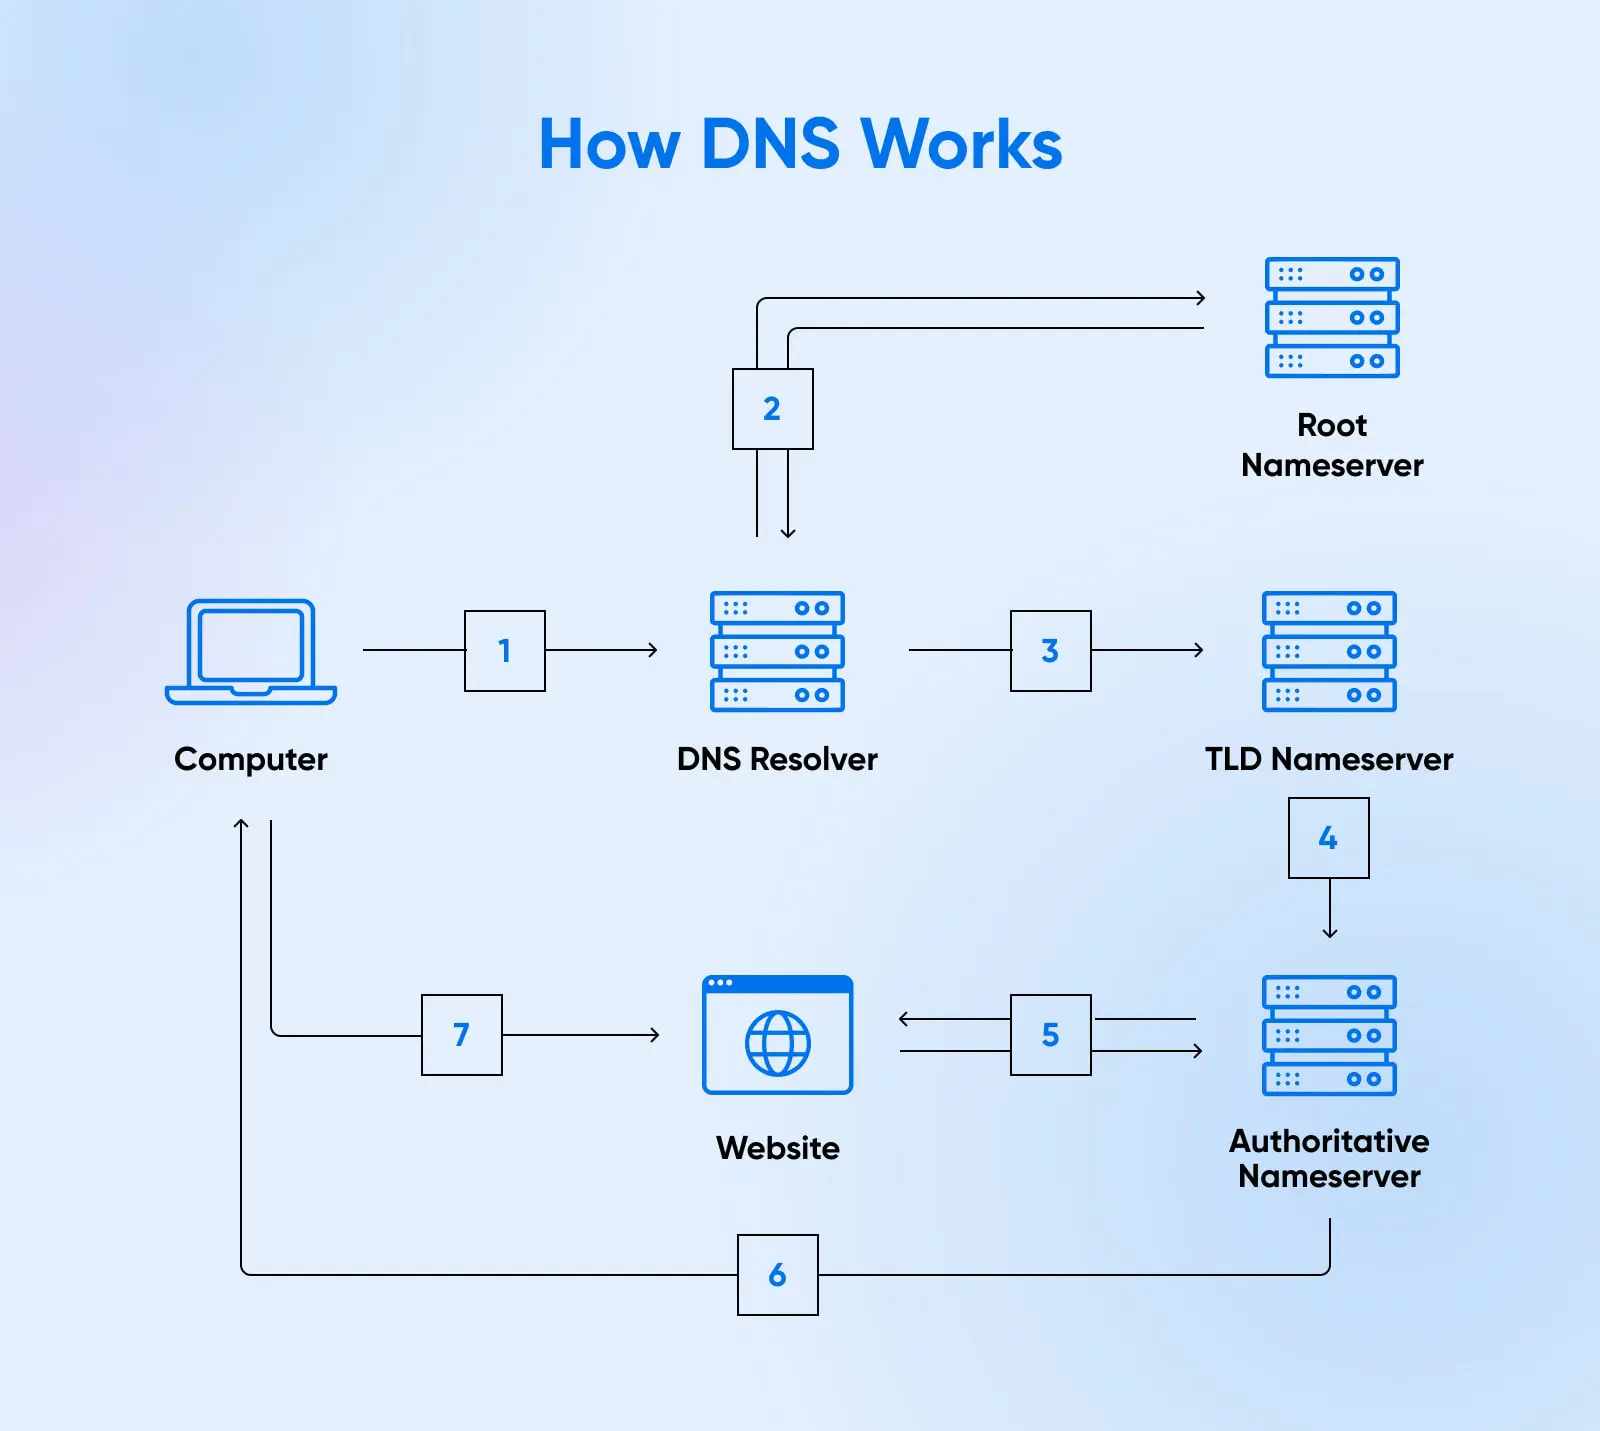 A "How DNS Works" diagram with numbers and arrows showing connections between different nodes. 